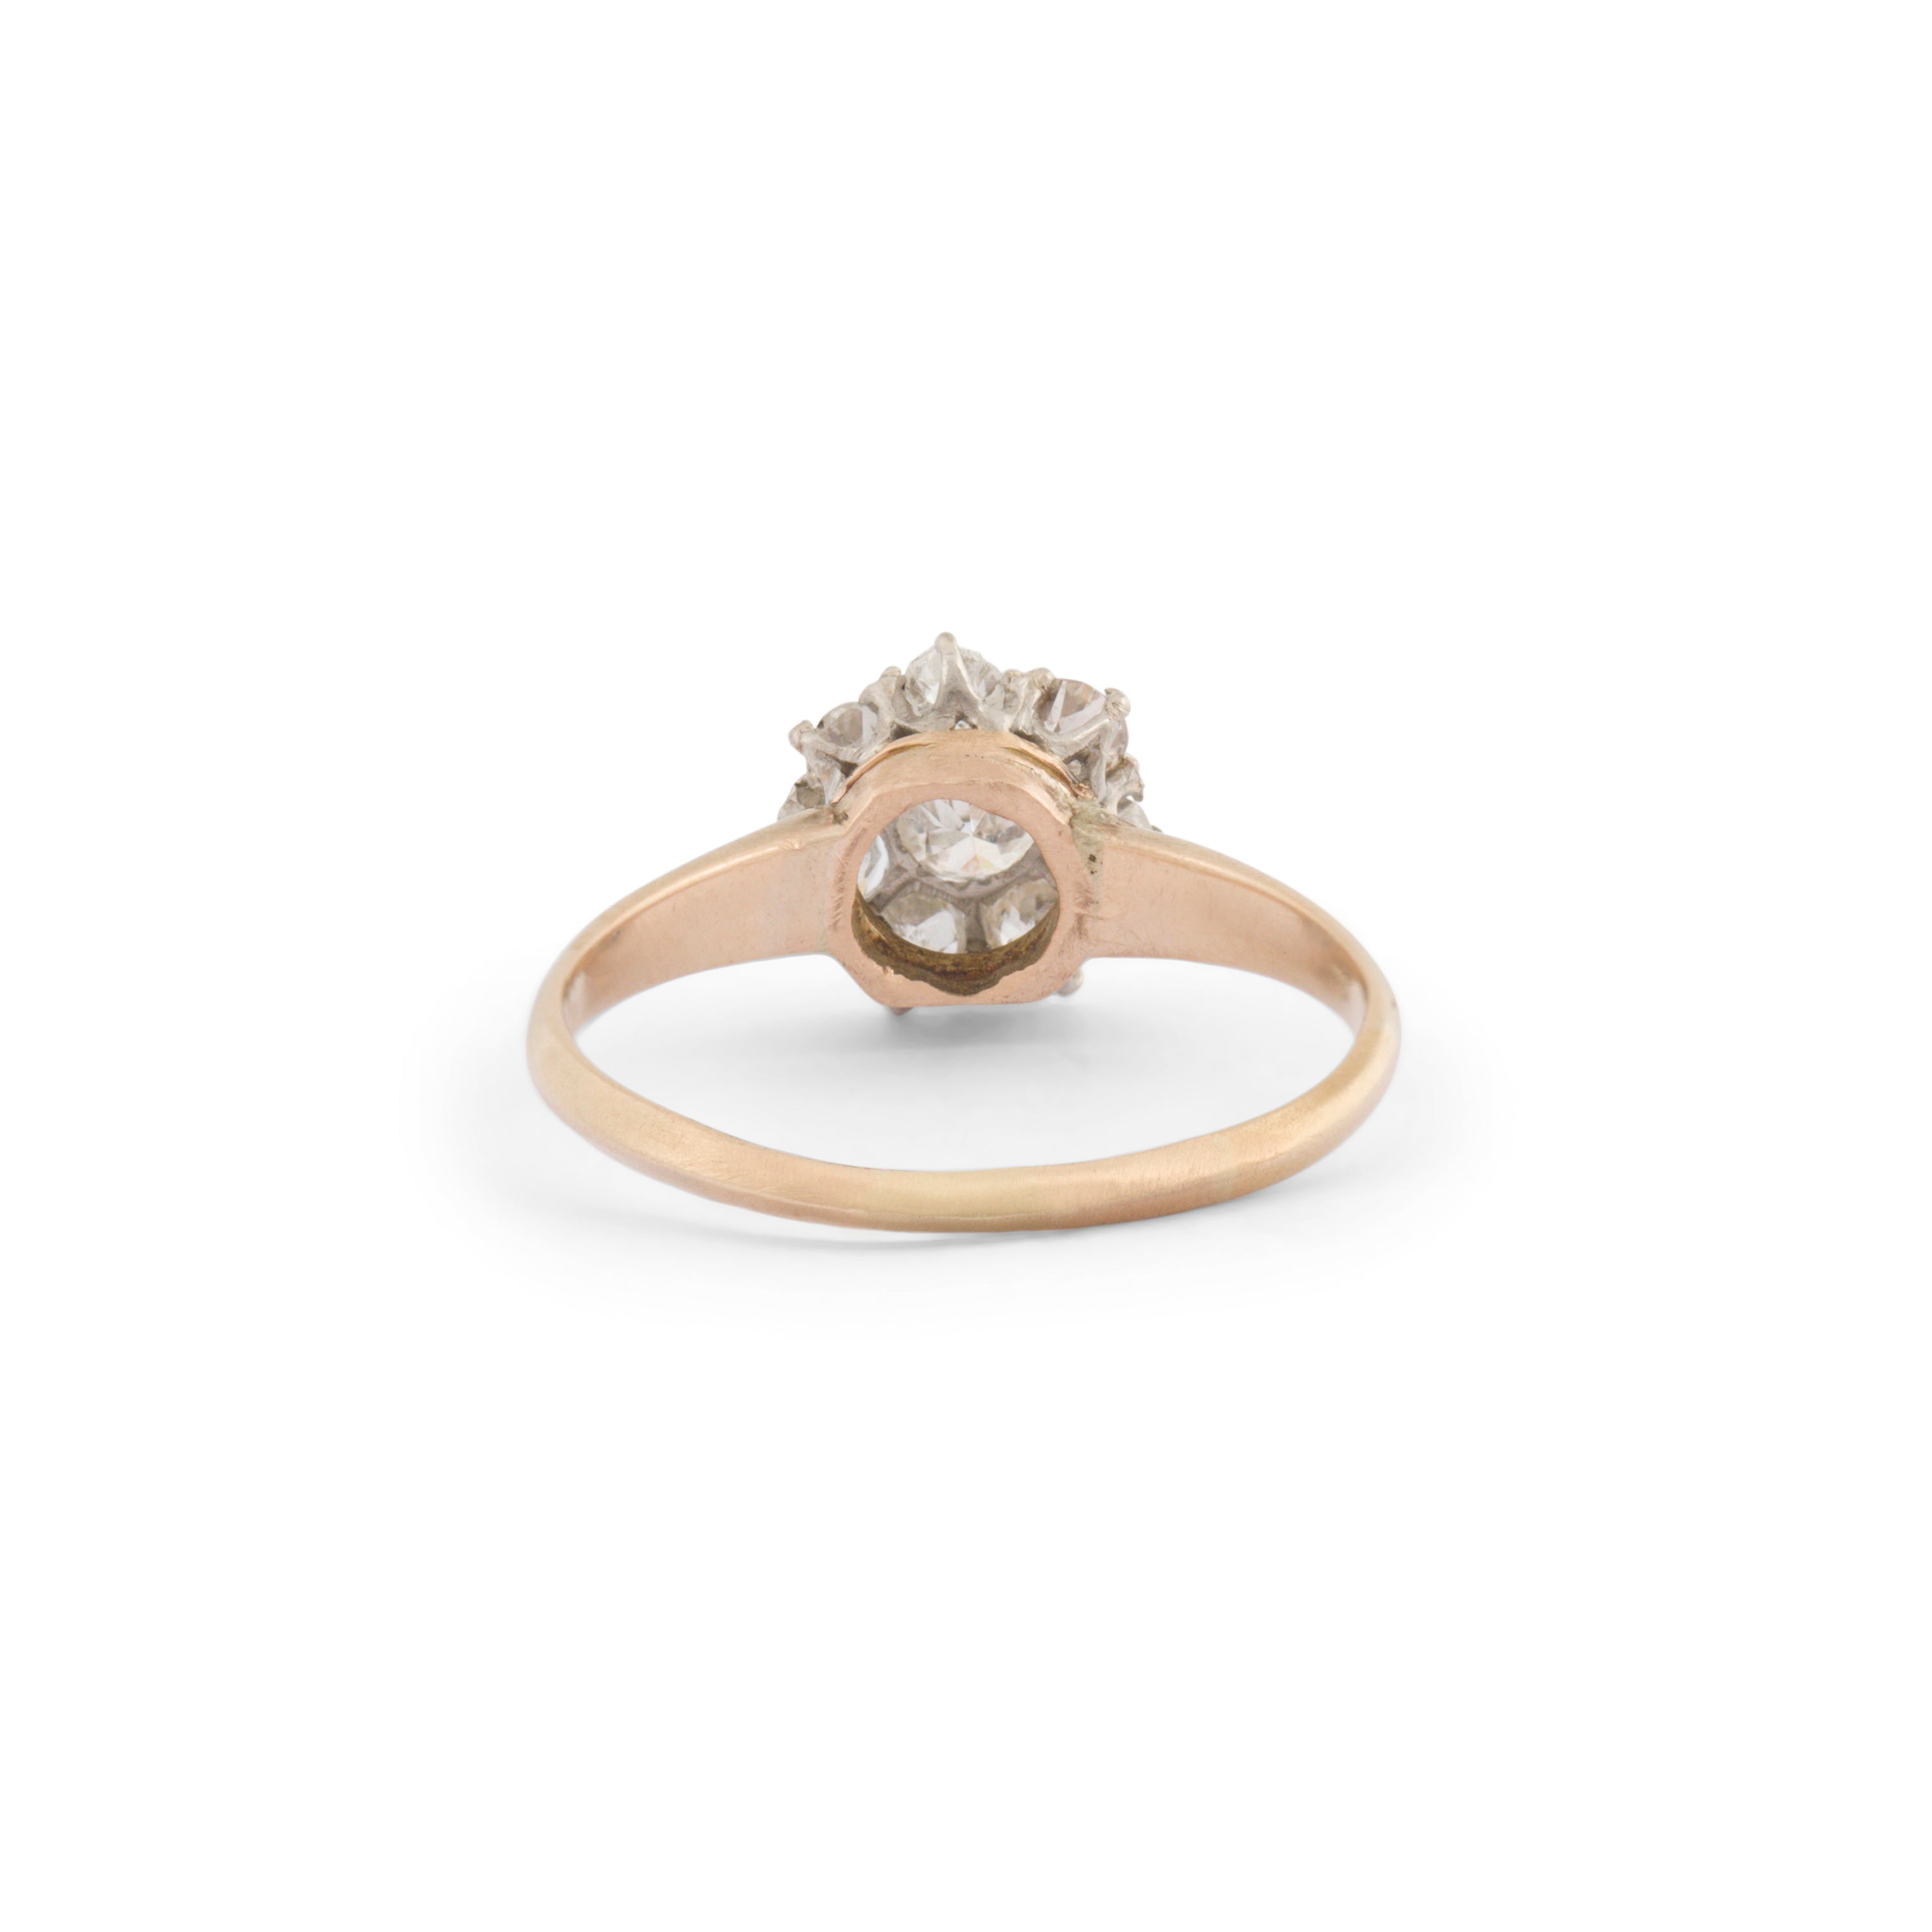 Old Cut Diamond Cluster 14k Gold Ring